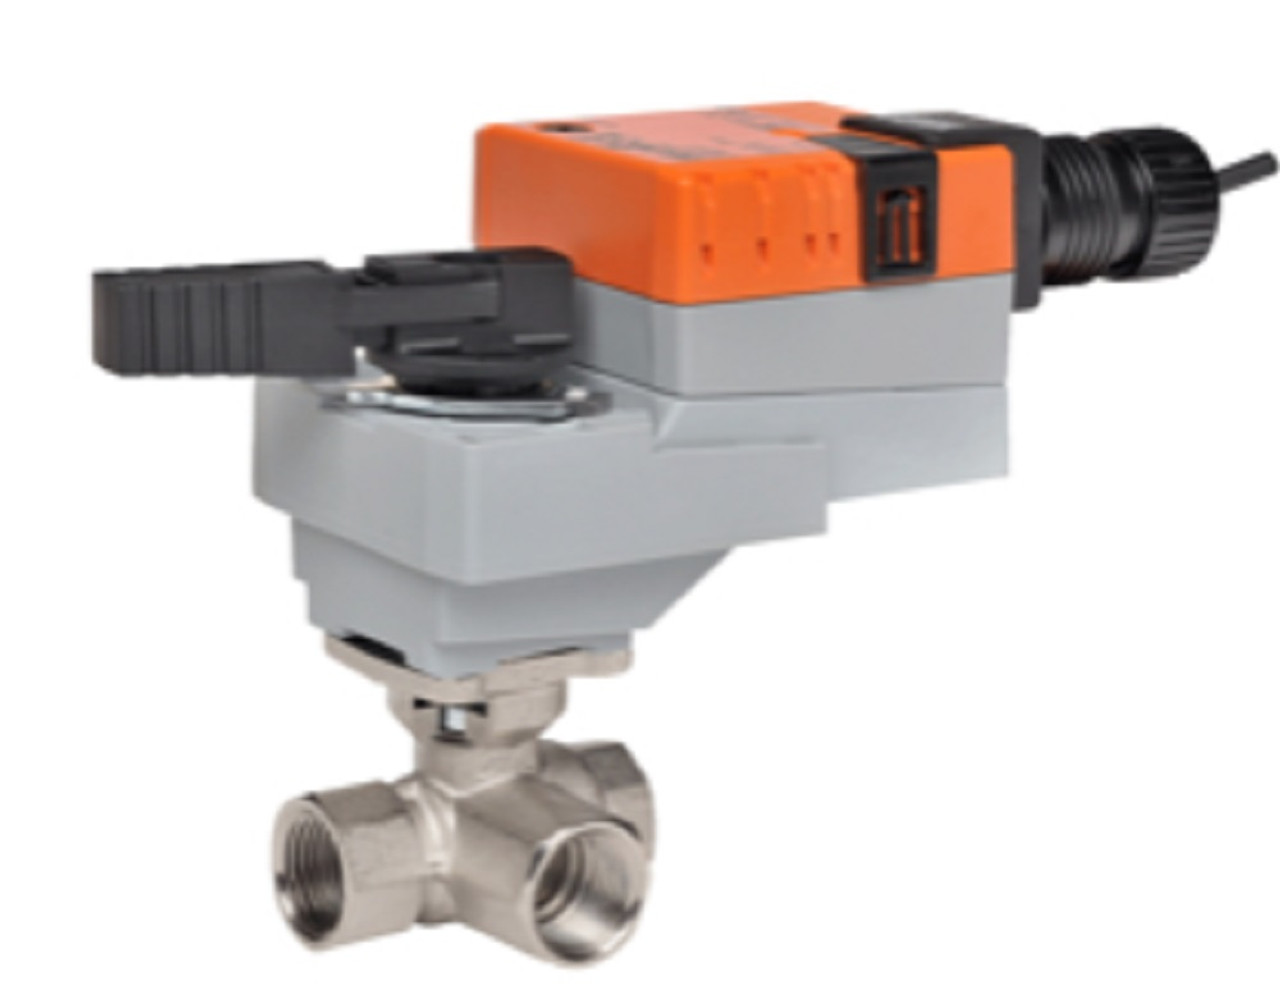 Belimo B323+LRB24-SR-T Characterized Control Valve (CCV), 1", 3-Way, w/Actuator [New]